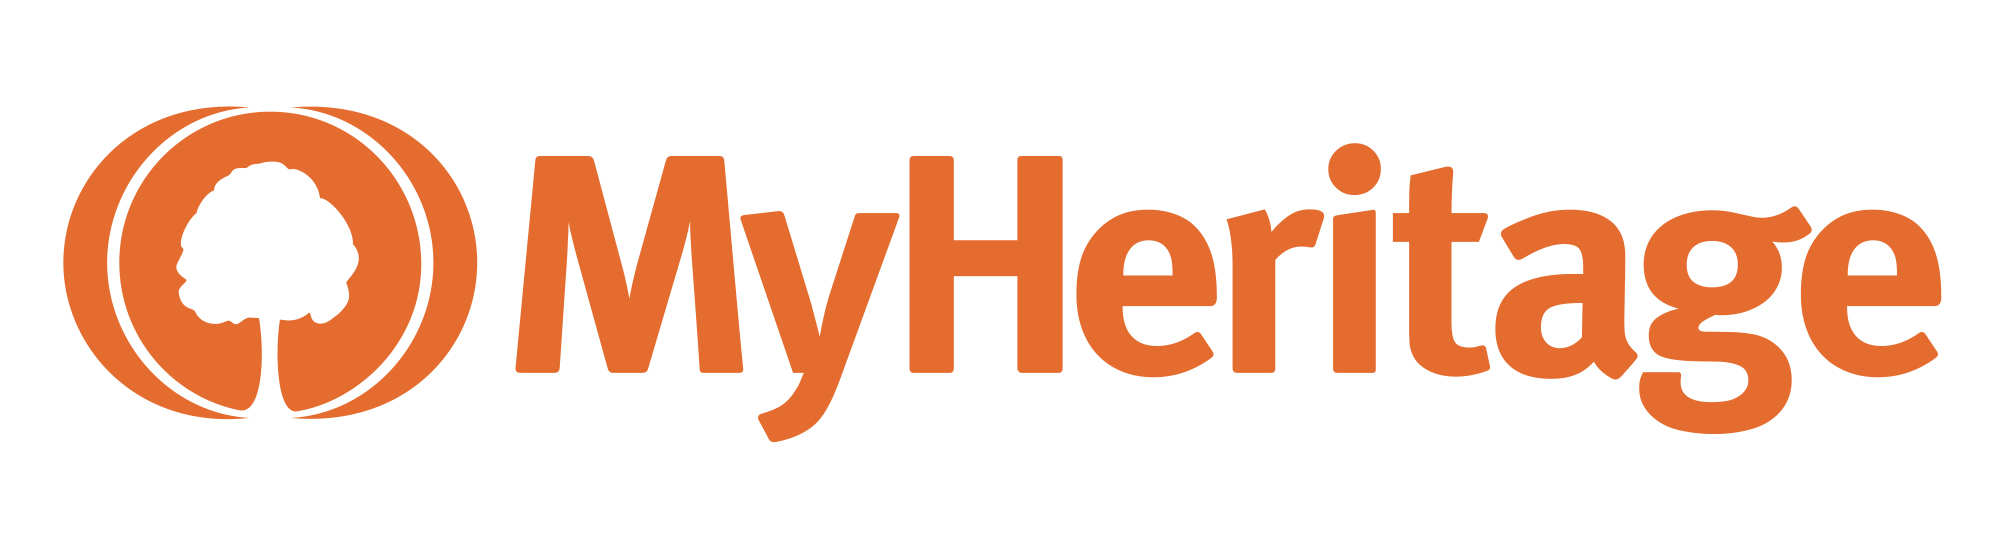 Image result for myheritage logo